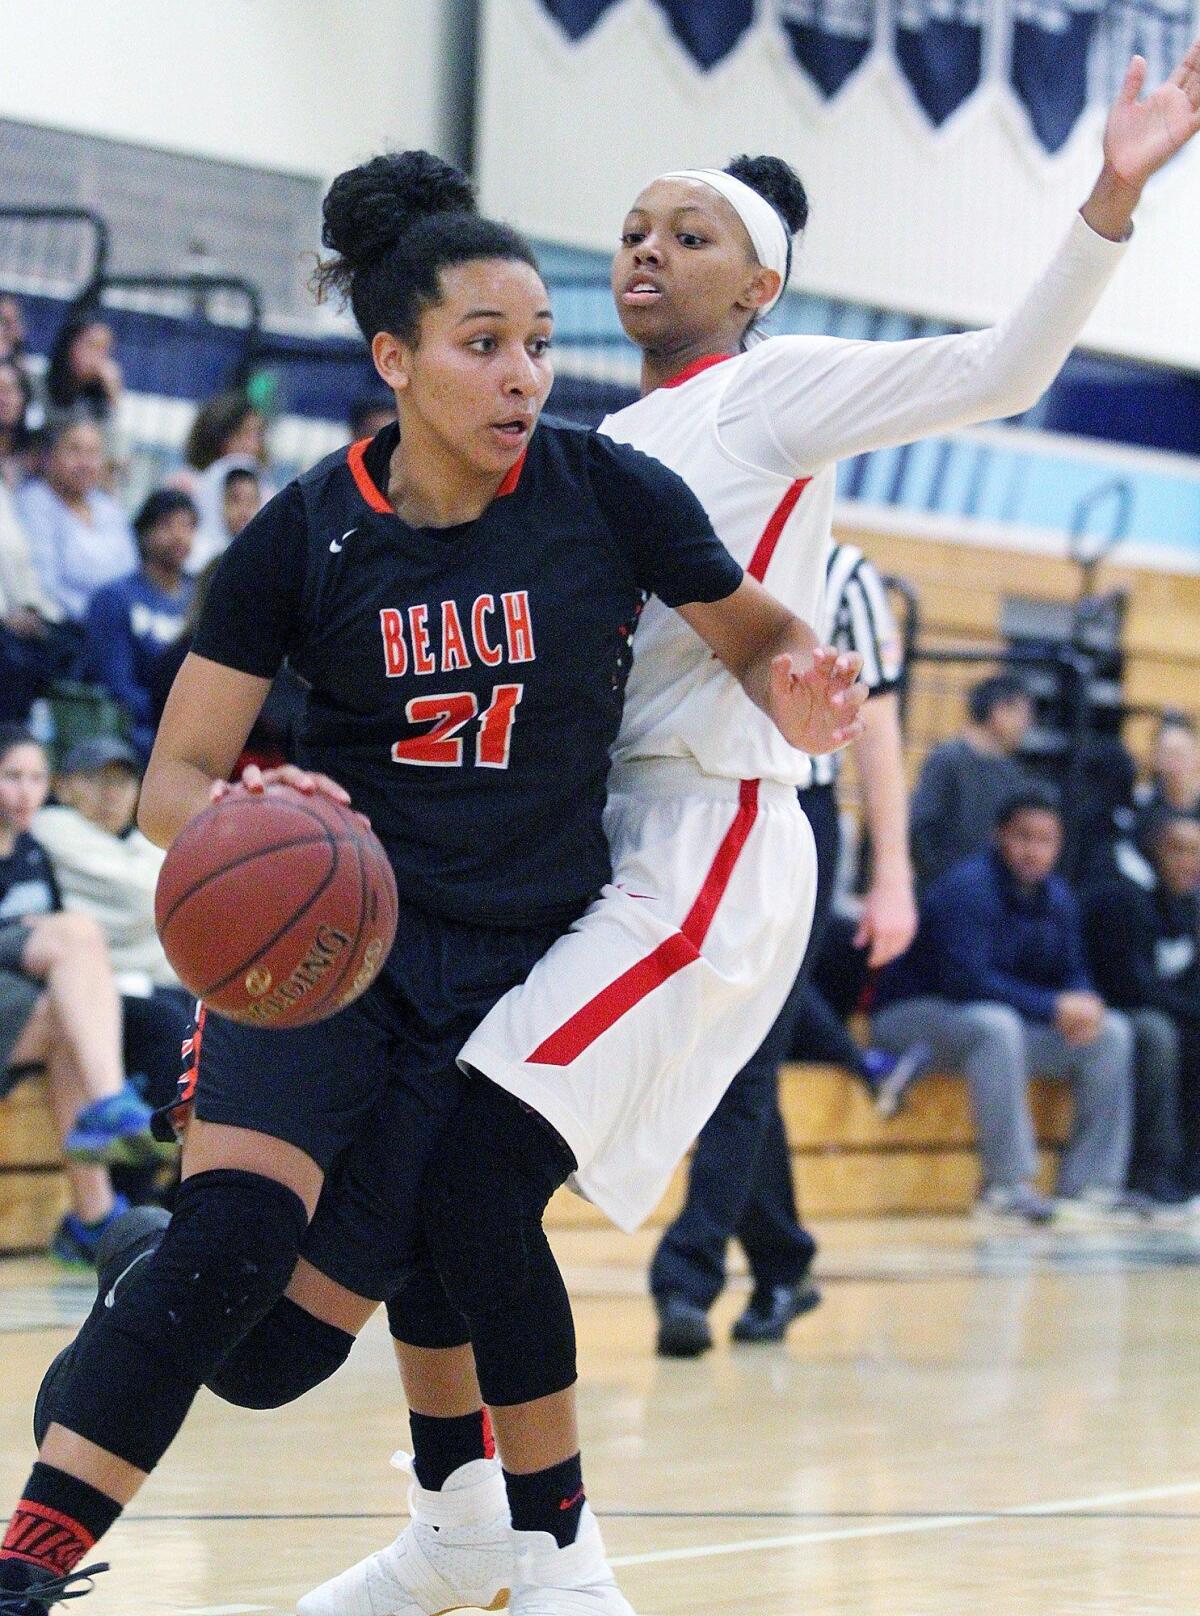 Huntington Beach’s Frankie Wade-Sanchez drives around Los Alamitos' Cailyn Crocker in the finals of the 23rd annual South Coast Classic Basketball Tournament at University High School in Irvine on Saturday, December 3, 2016.